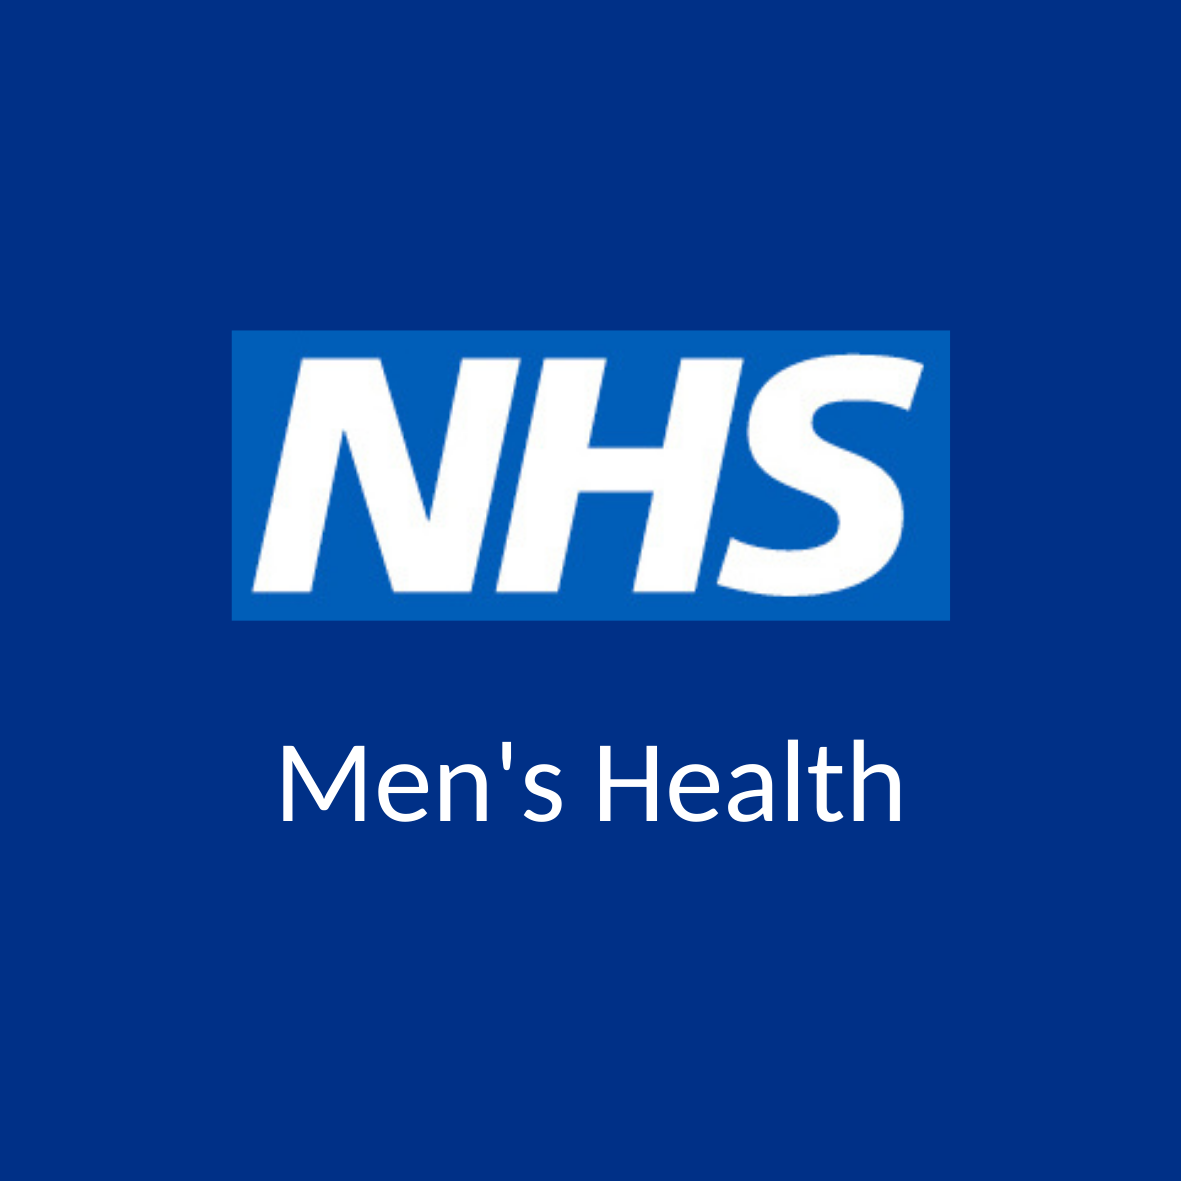 NHS Logo and Words 'Men's Health'